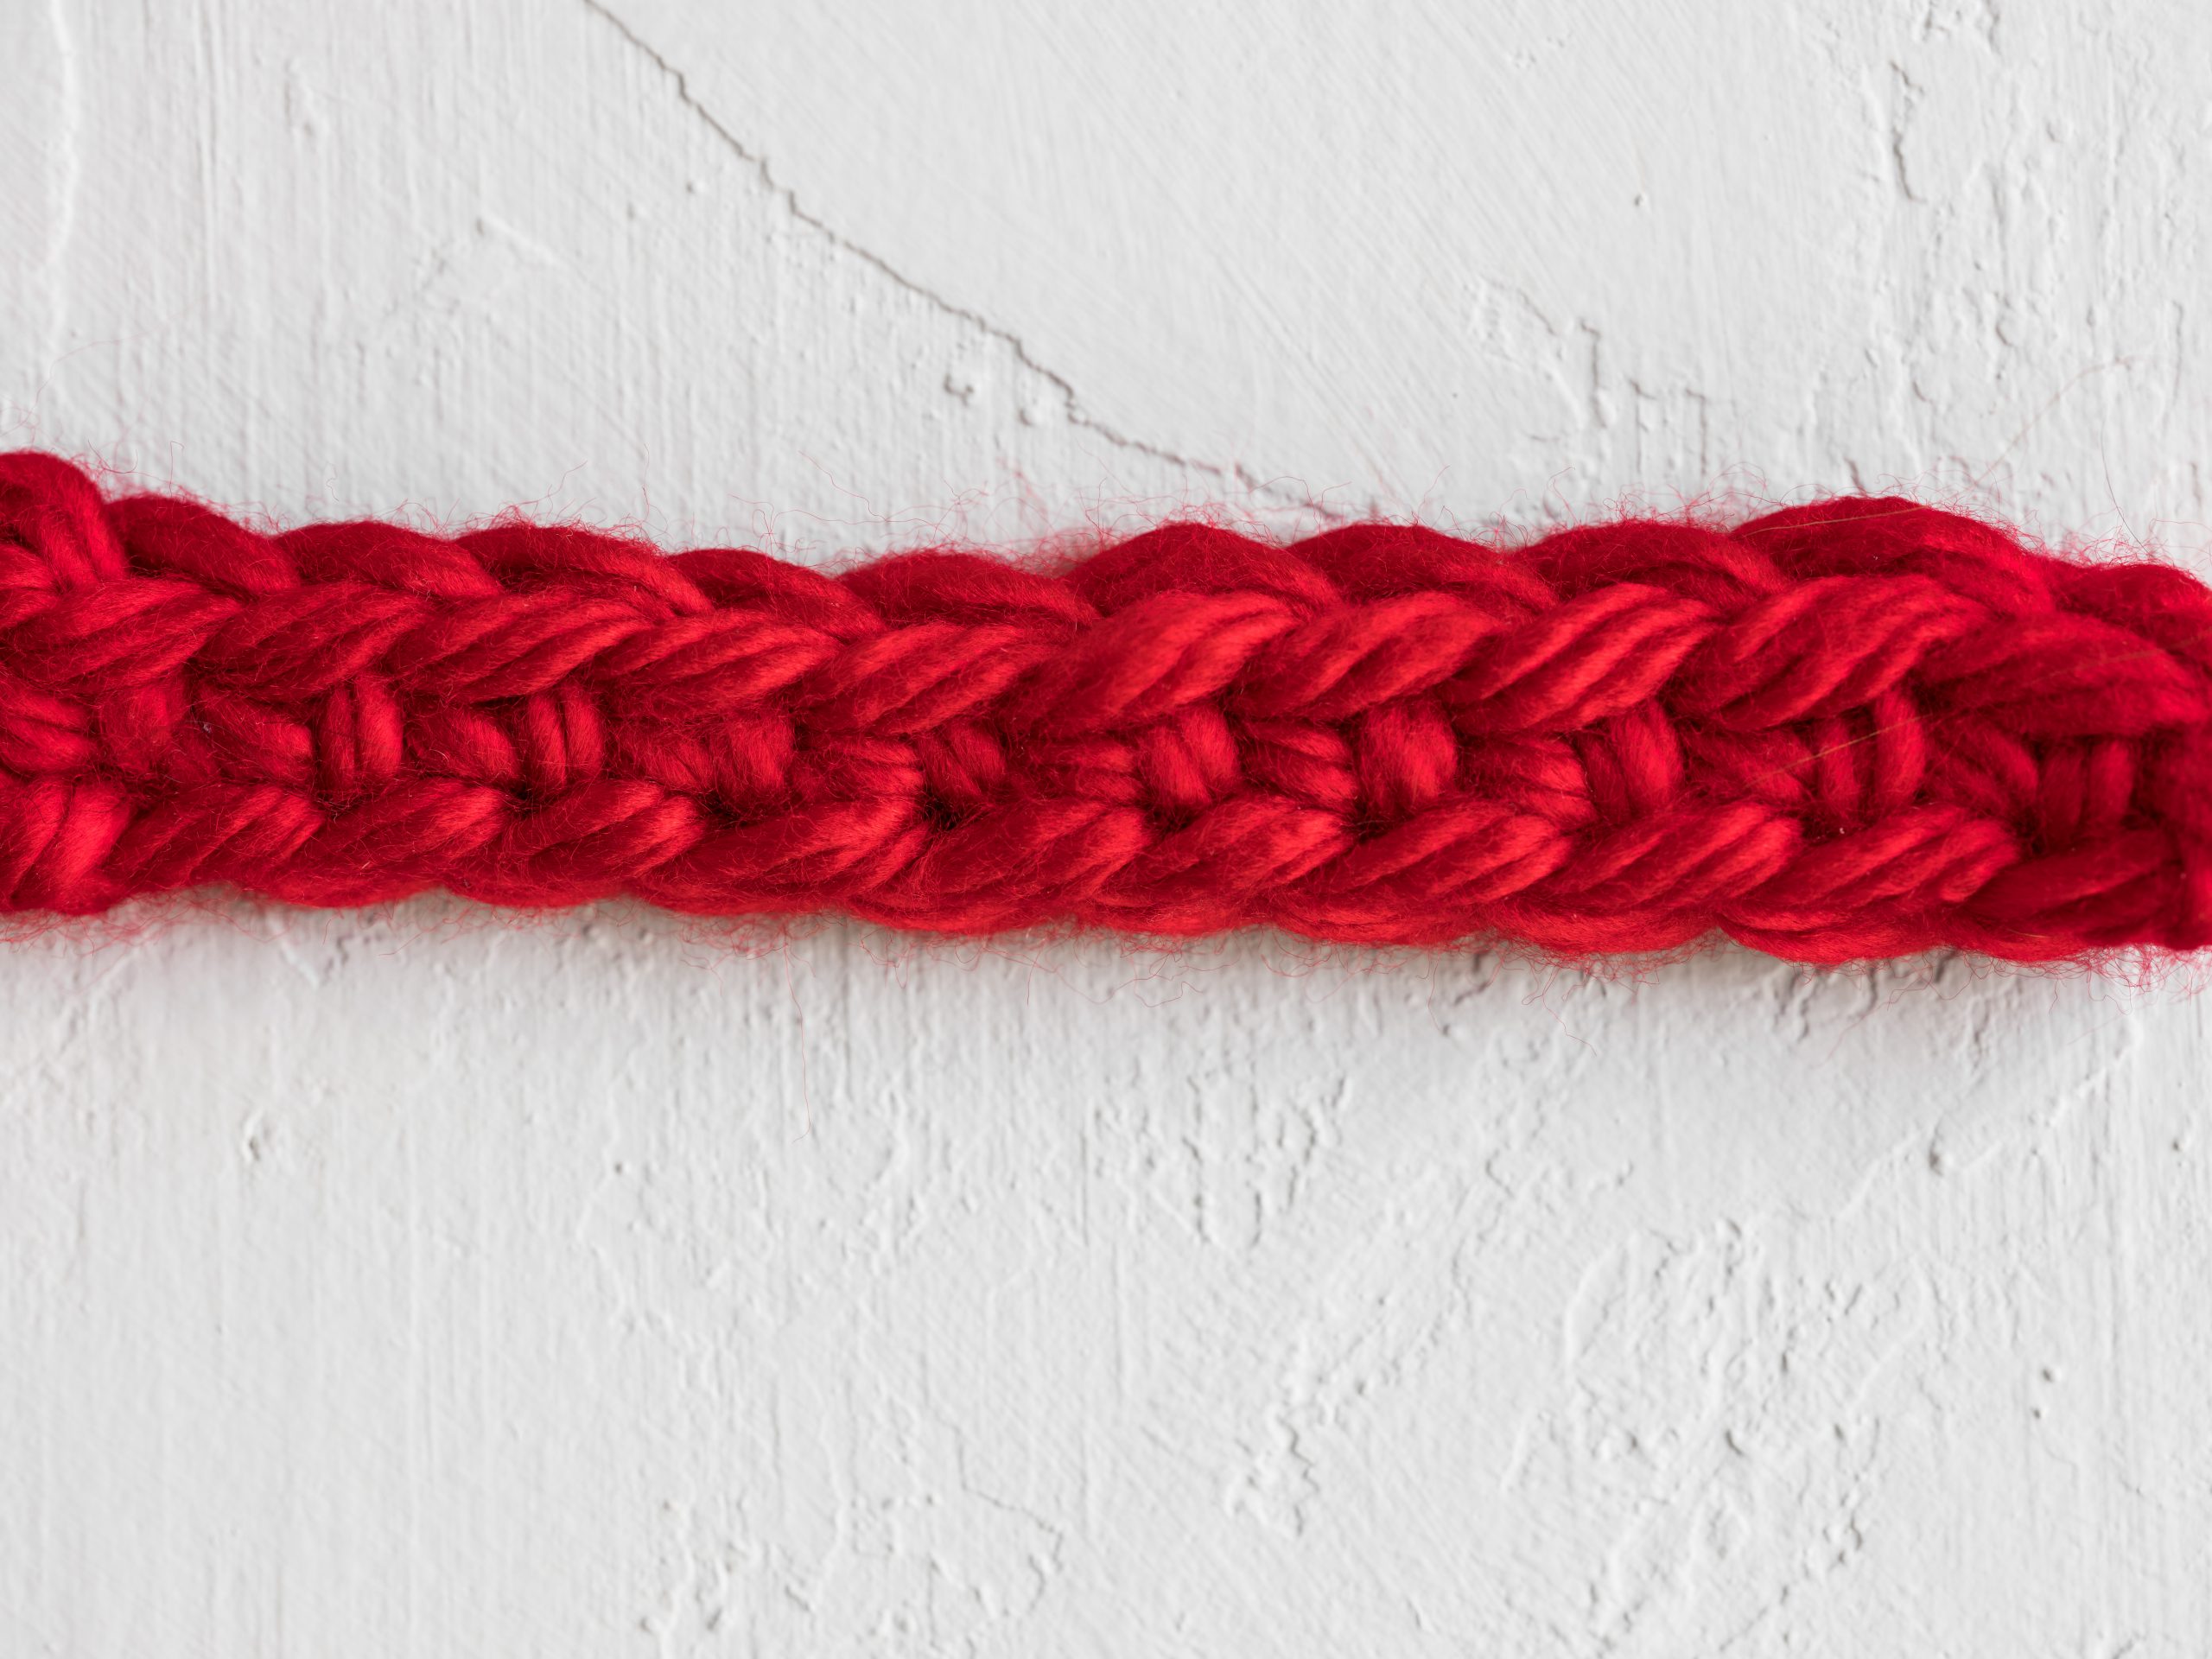 The Best Crochet Stitches for Chunky Yarn | Craftsy